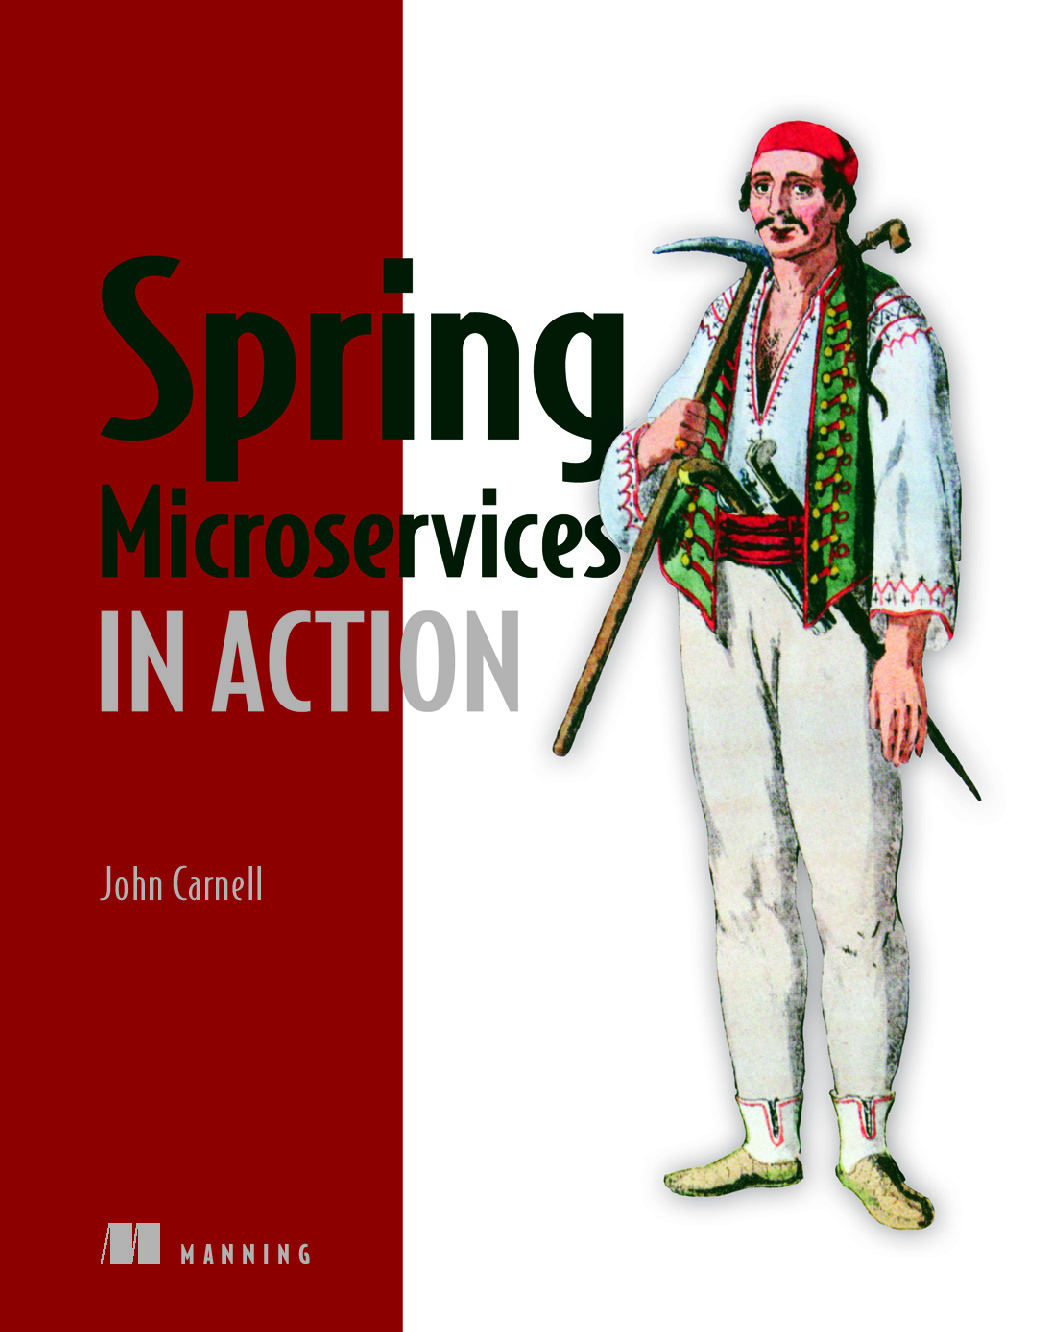 8.Spring Microservices in Action – John Carnell